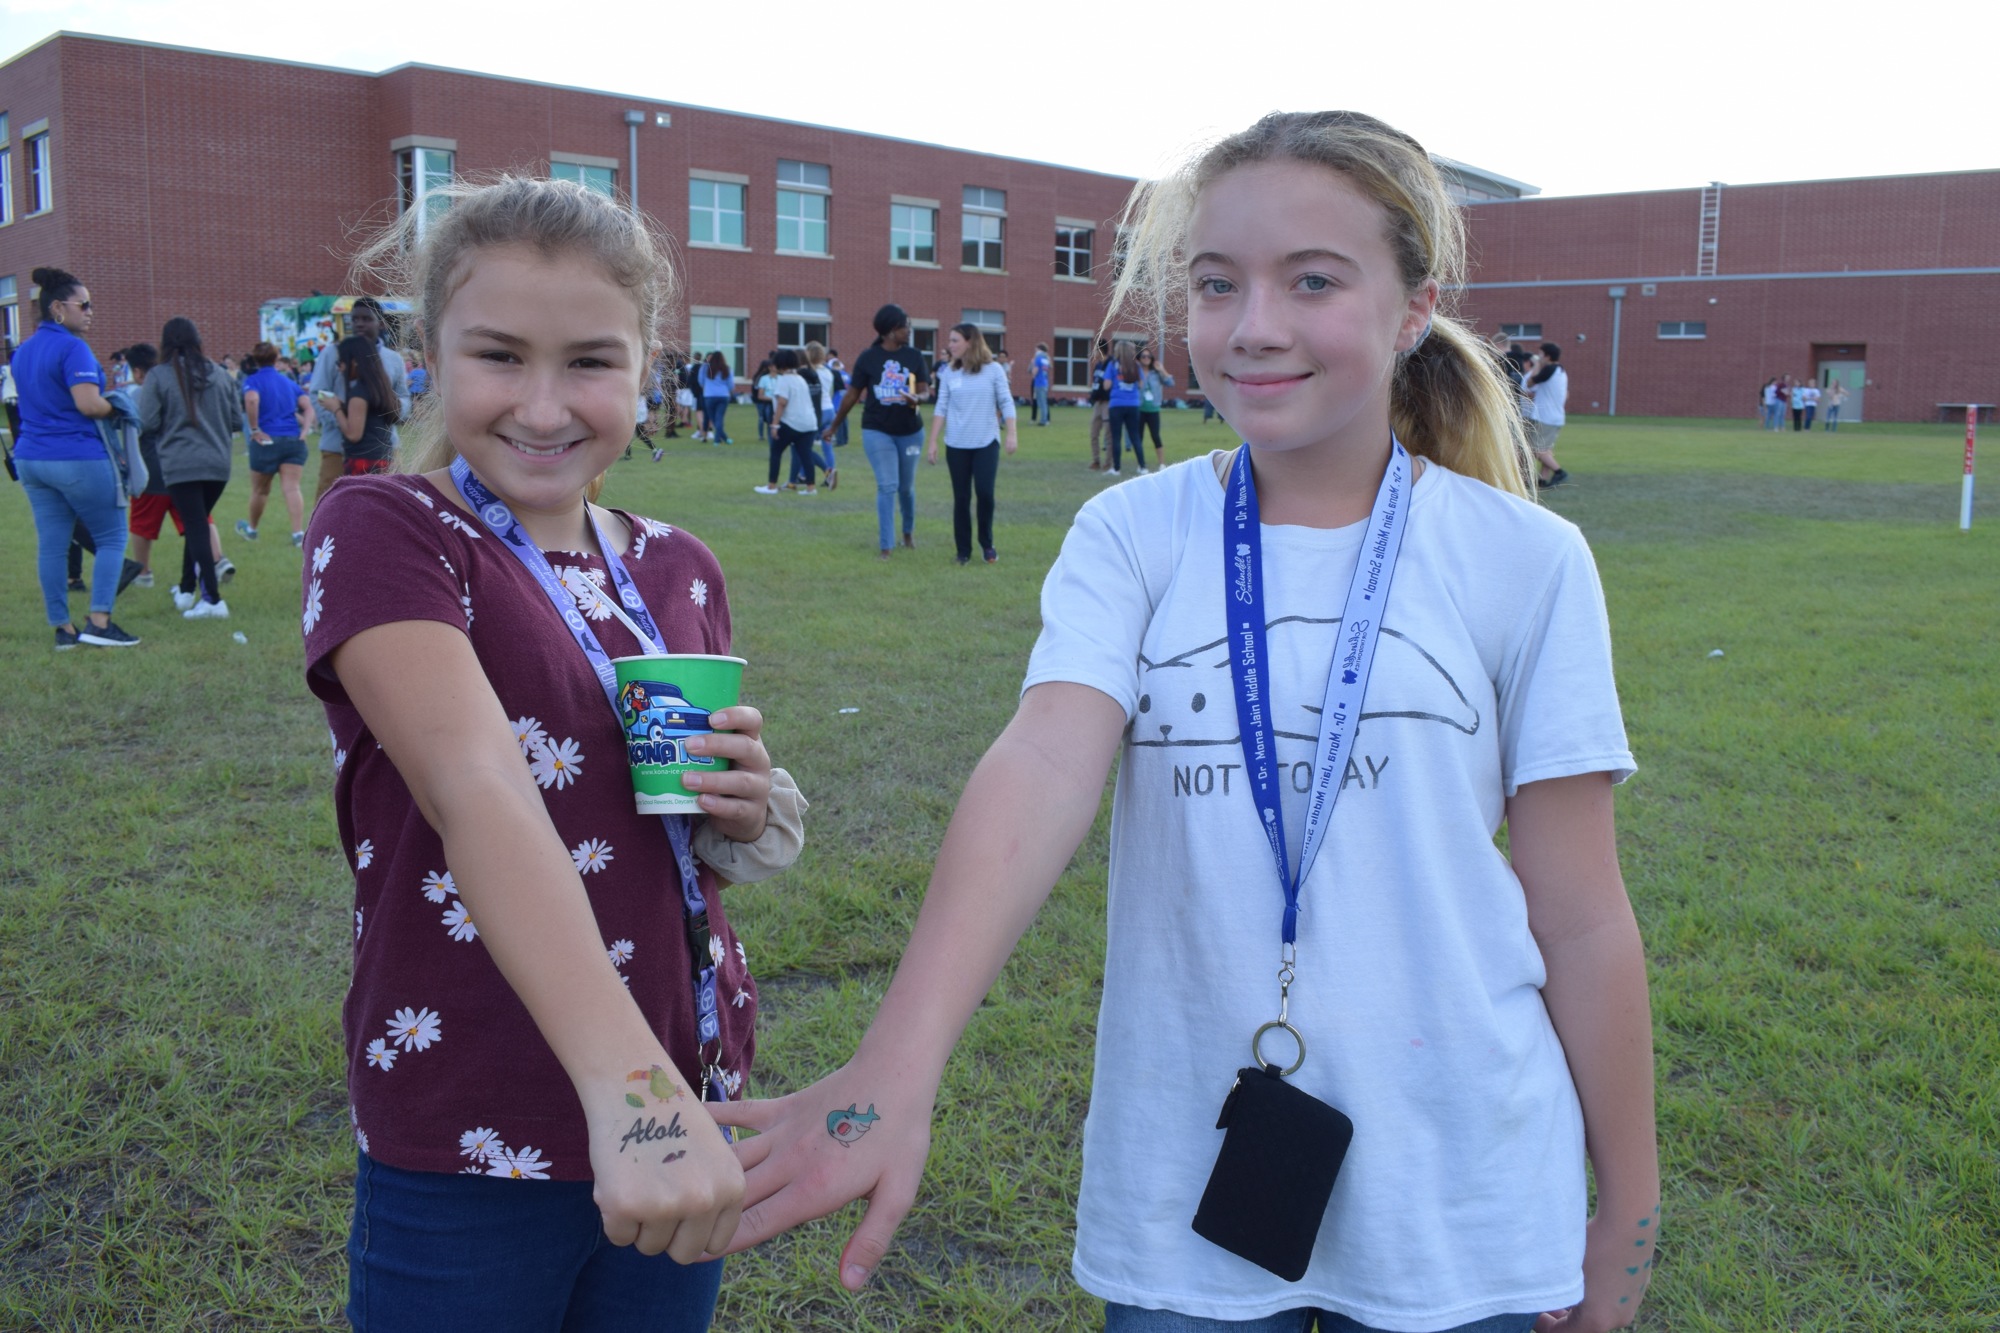 Olivia Autrey and Hana Pierce, sixth graders, show off their temporary tattoos during a field day that celebrated student success. Field days were some of the most memorable moments of the year for students. File photo.